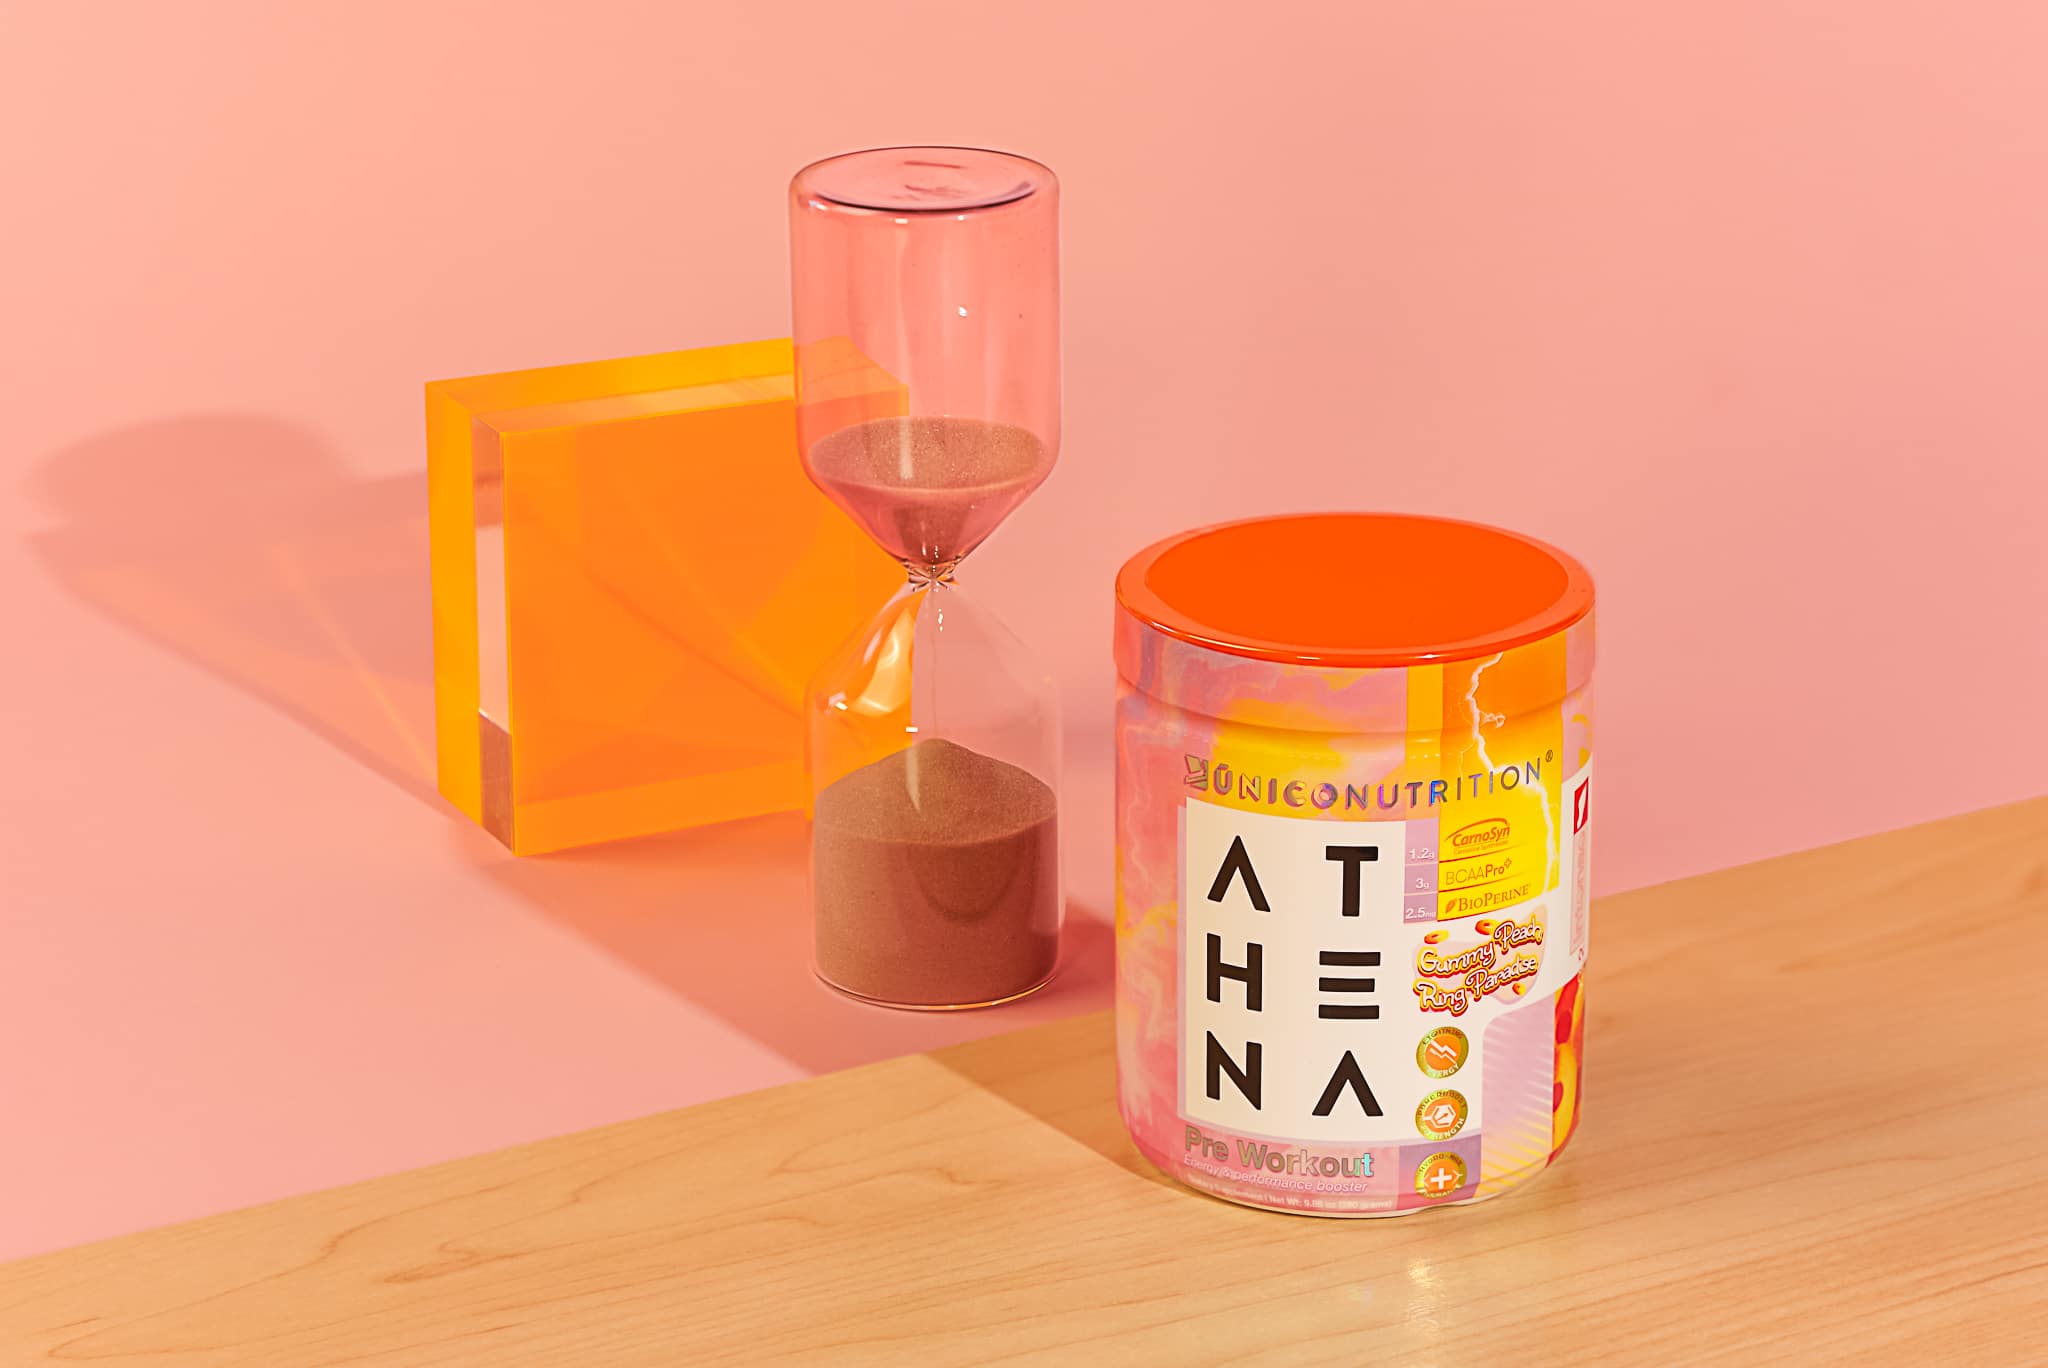 jar of peach flavored pre workout on plywood table with pink hourglass and orange plastic decoration